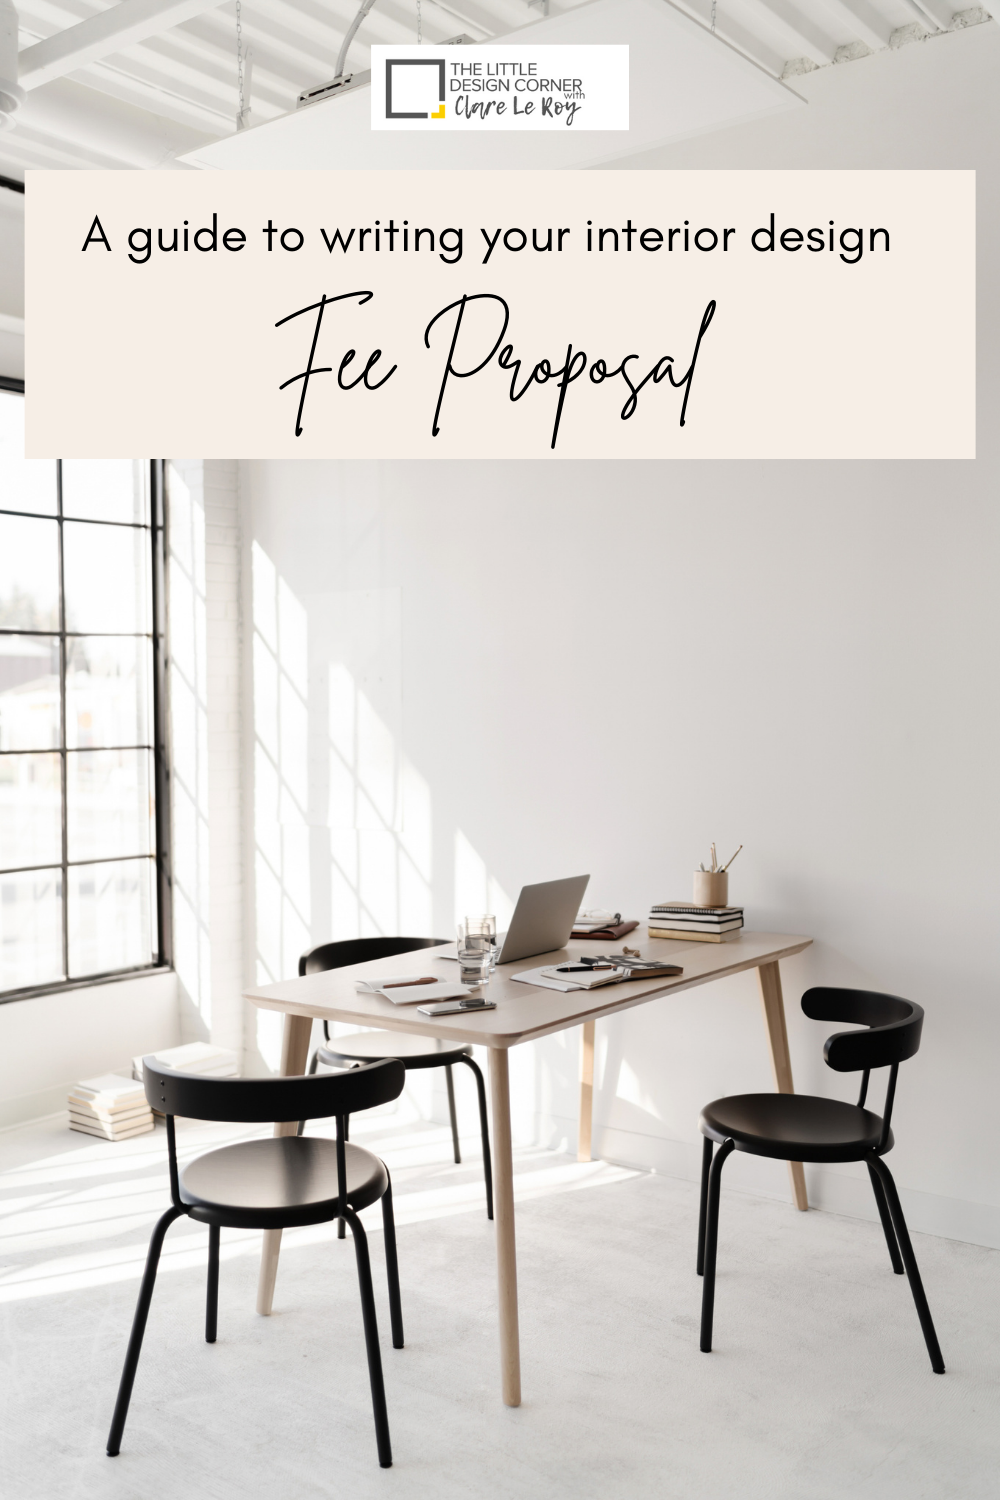 a-guide-to-writing-your-interior-design-fee-proposal-the-little